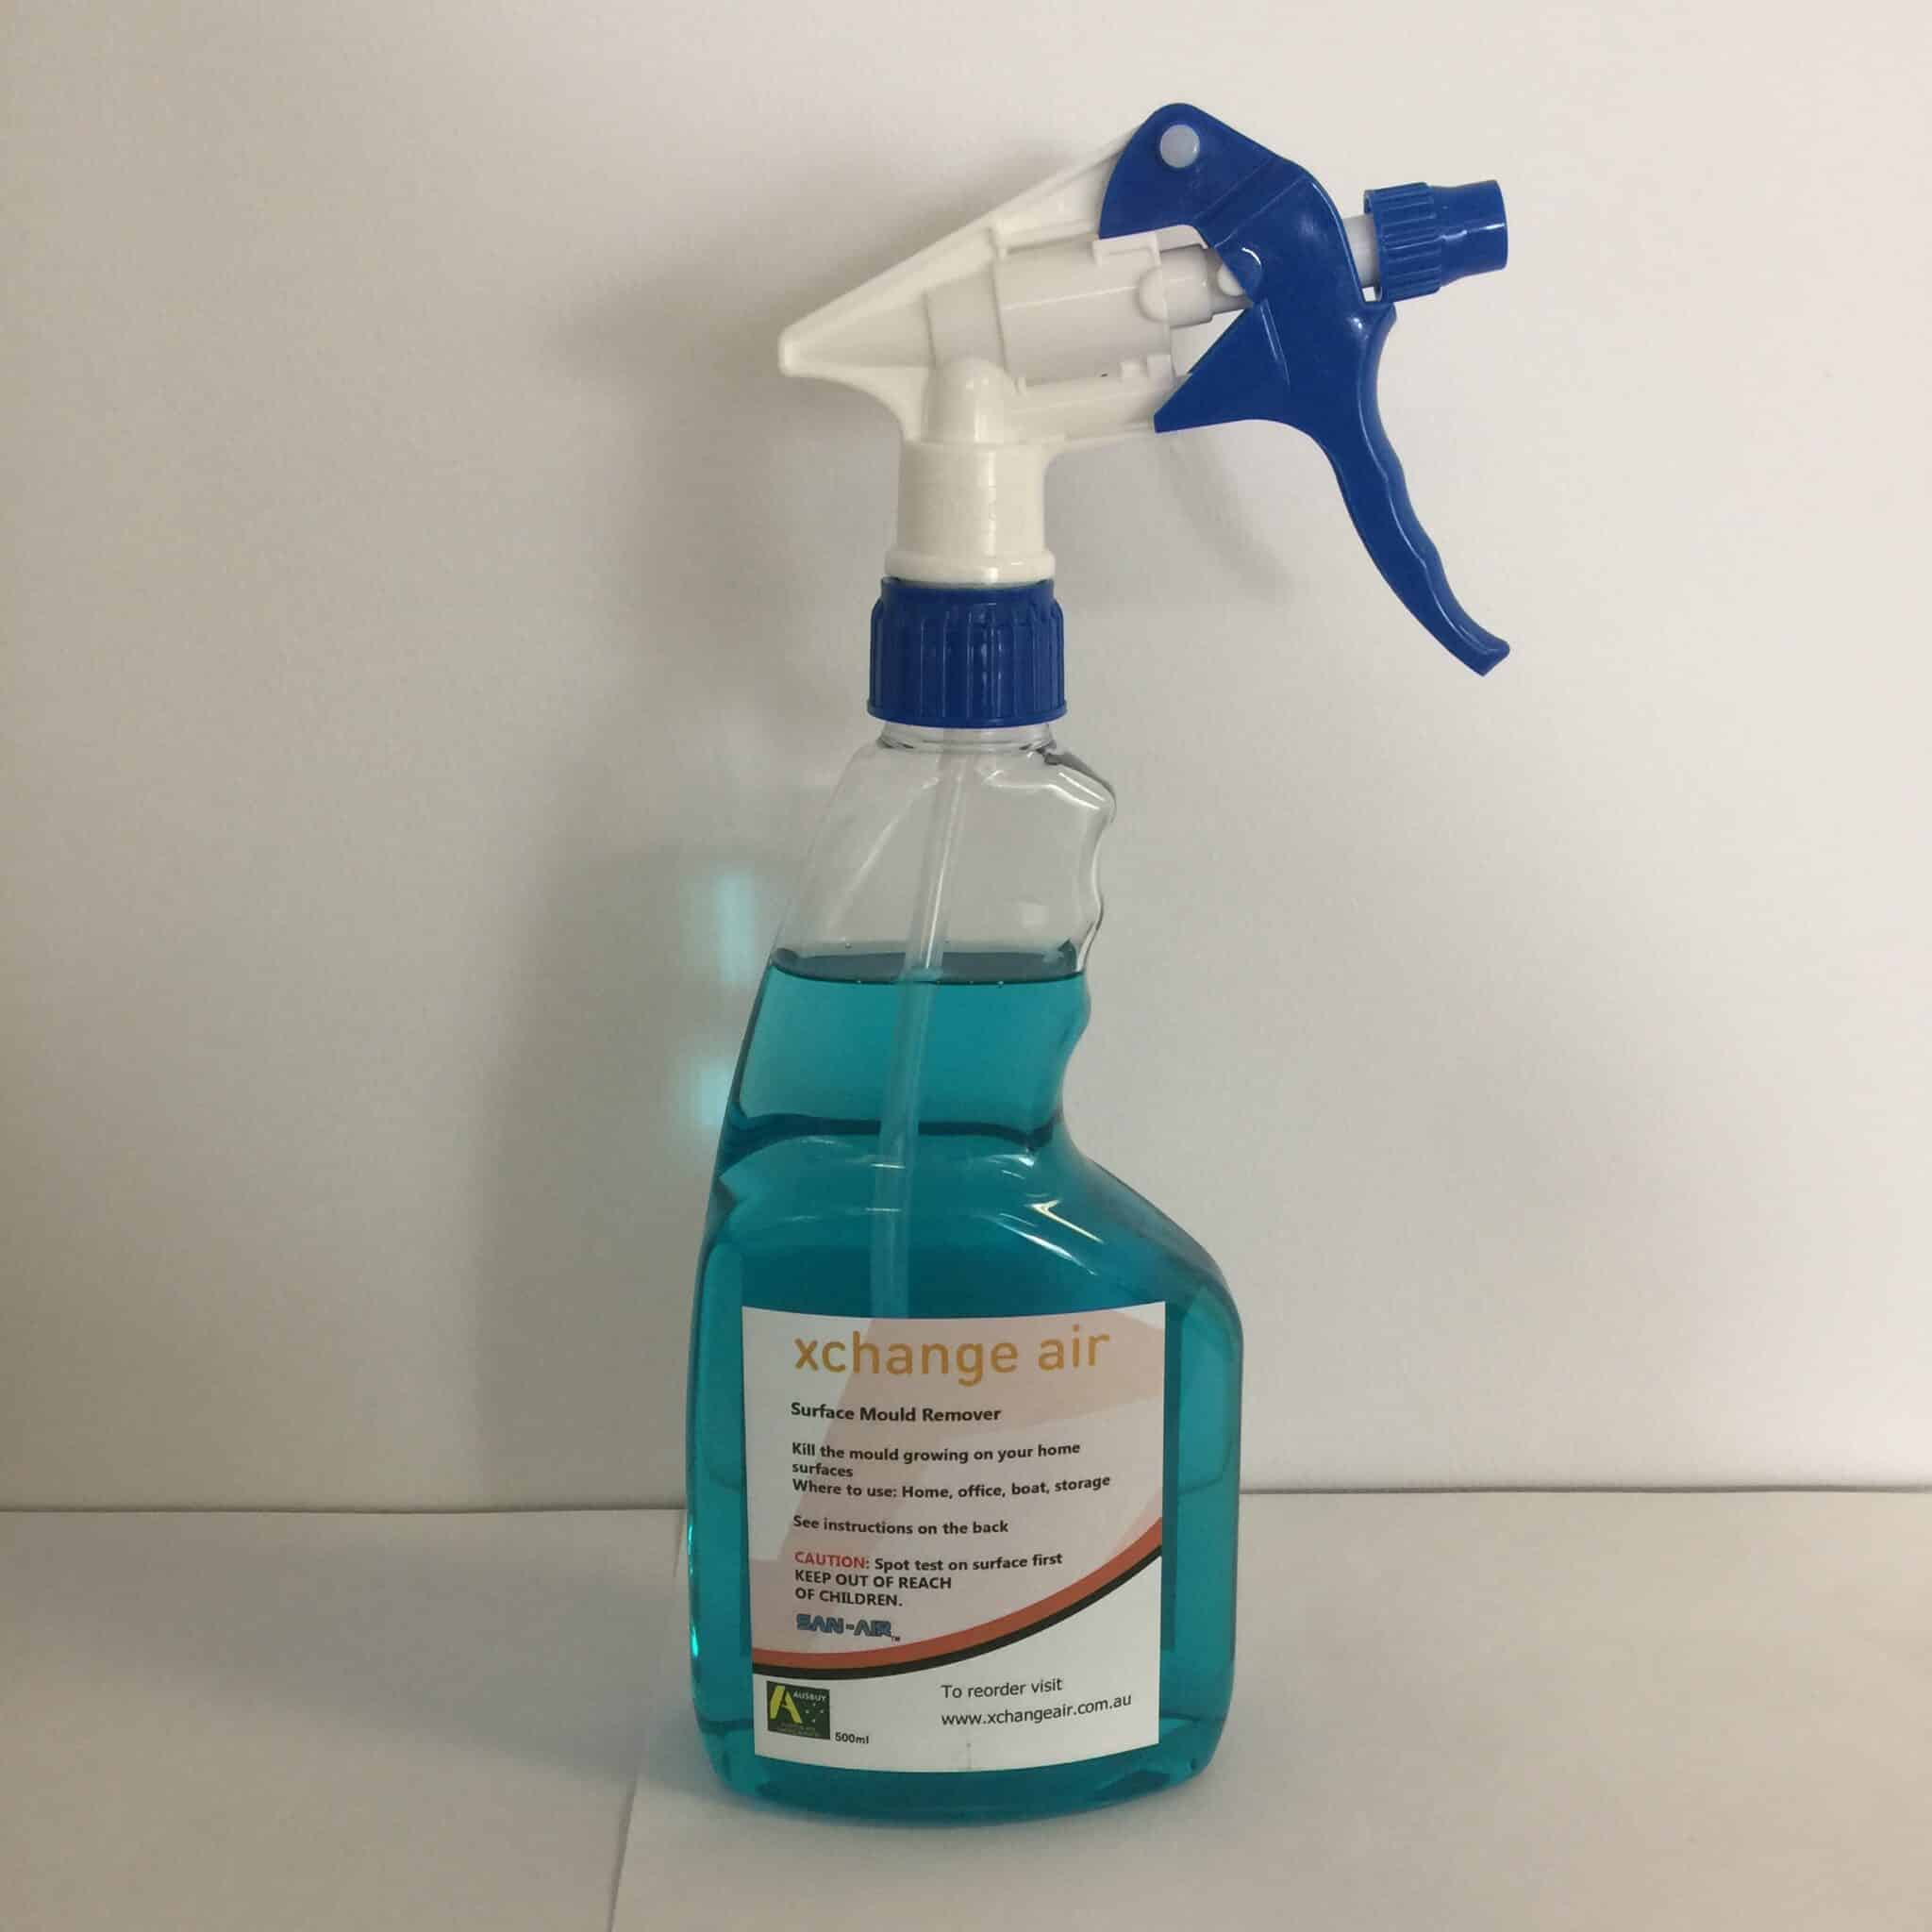 Surface Mould Remover